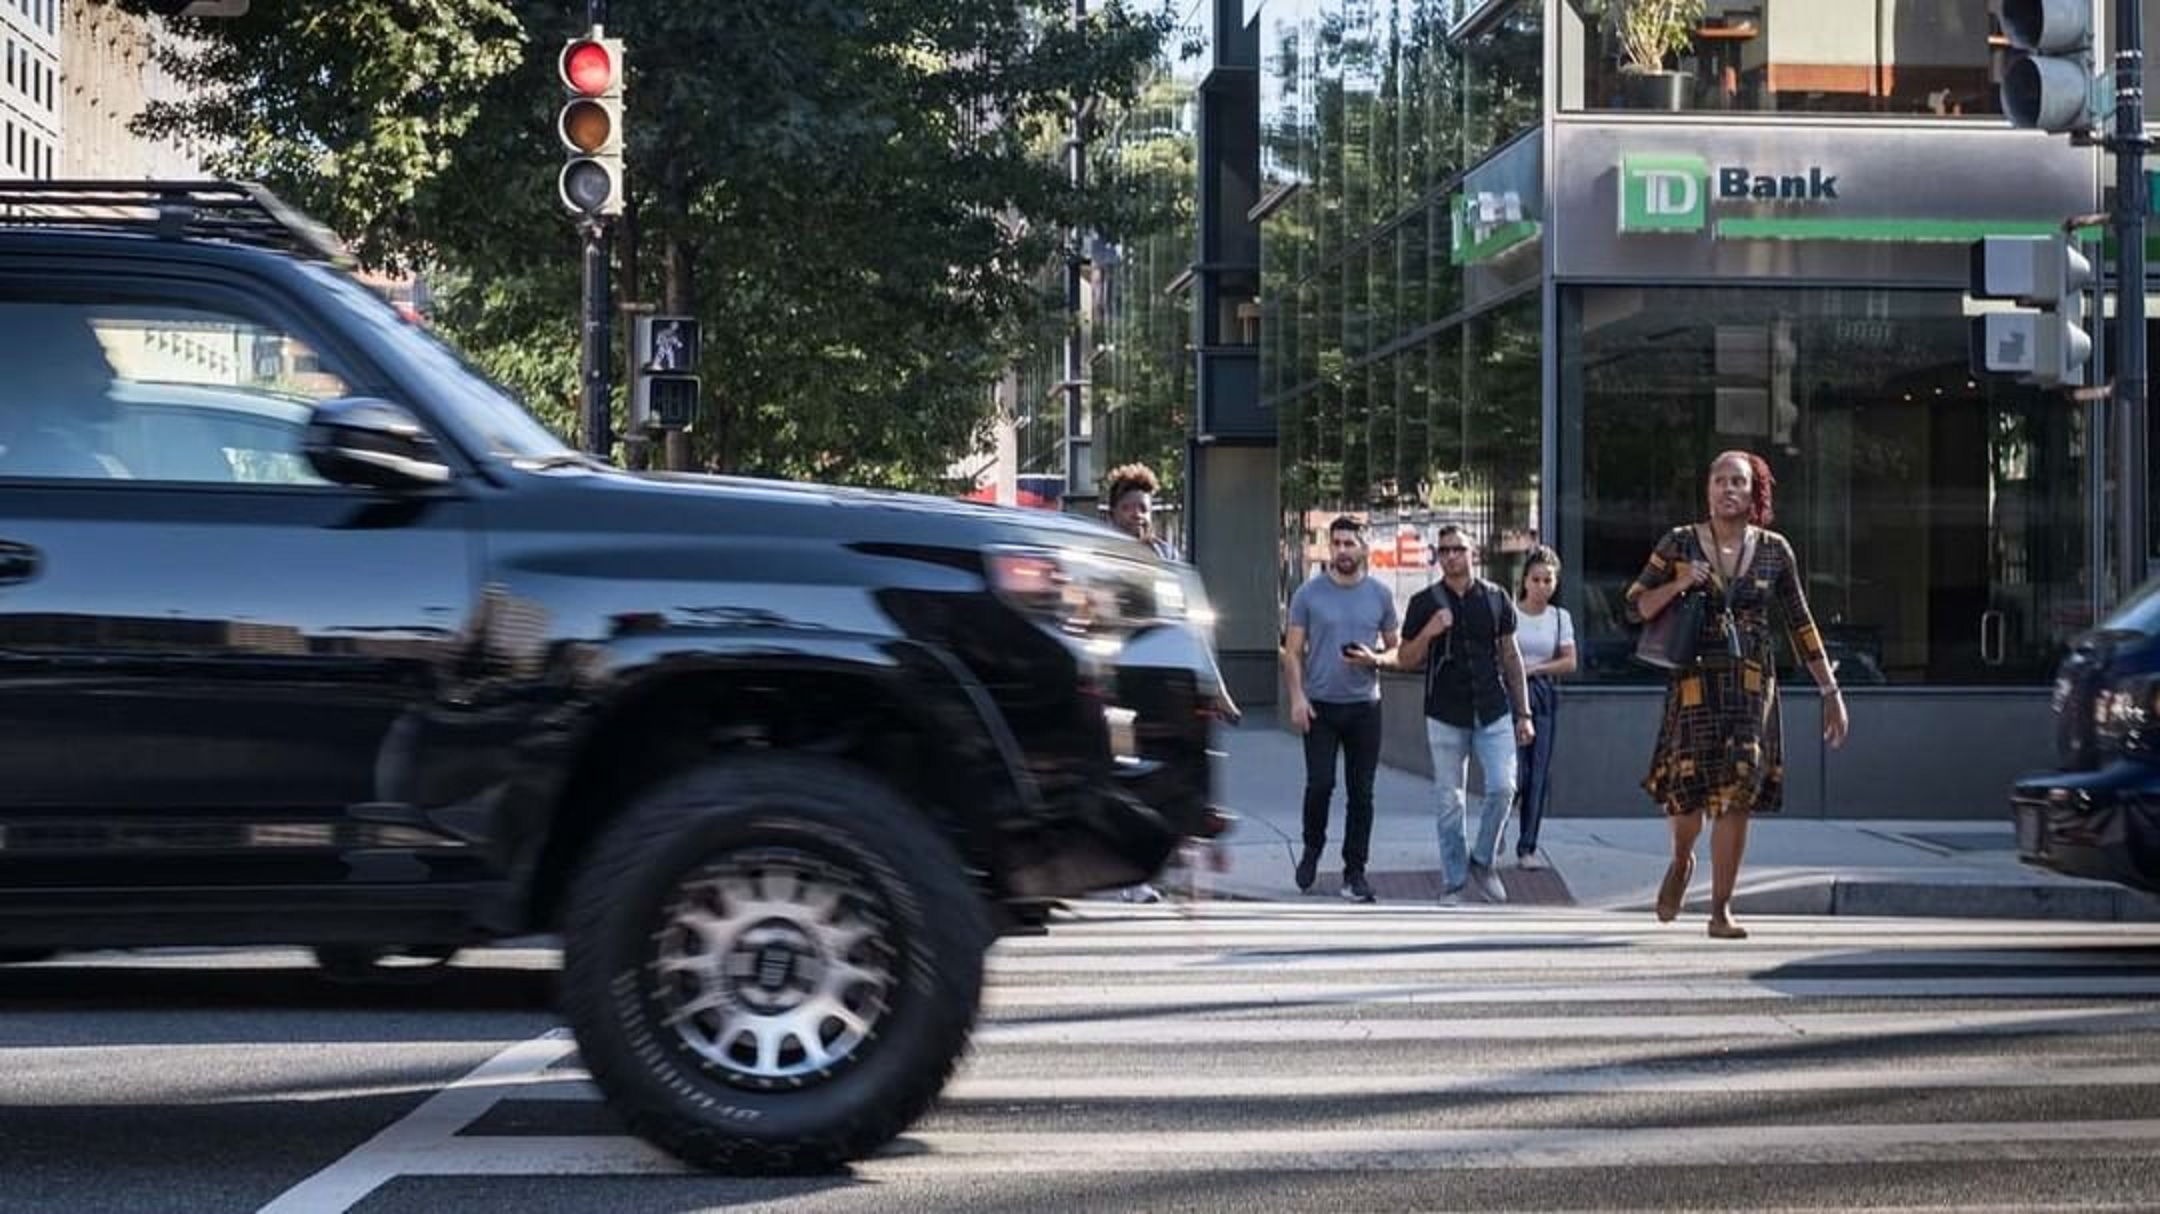 An SUV drives close over a pedestrian crossing in a city